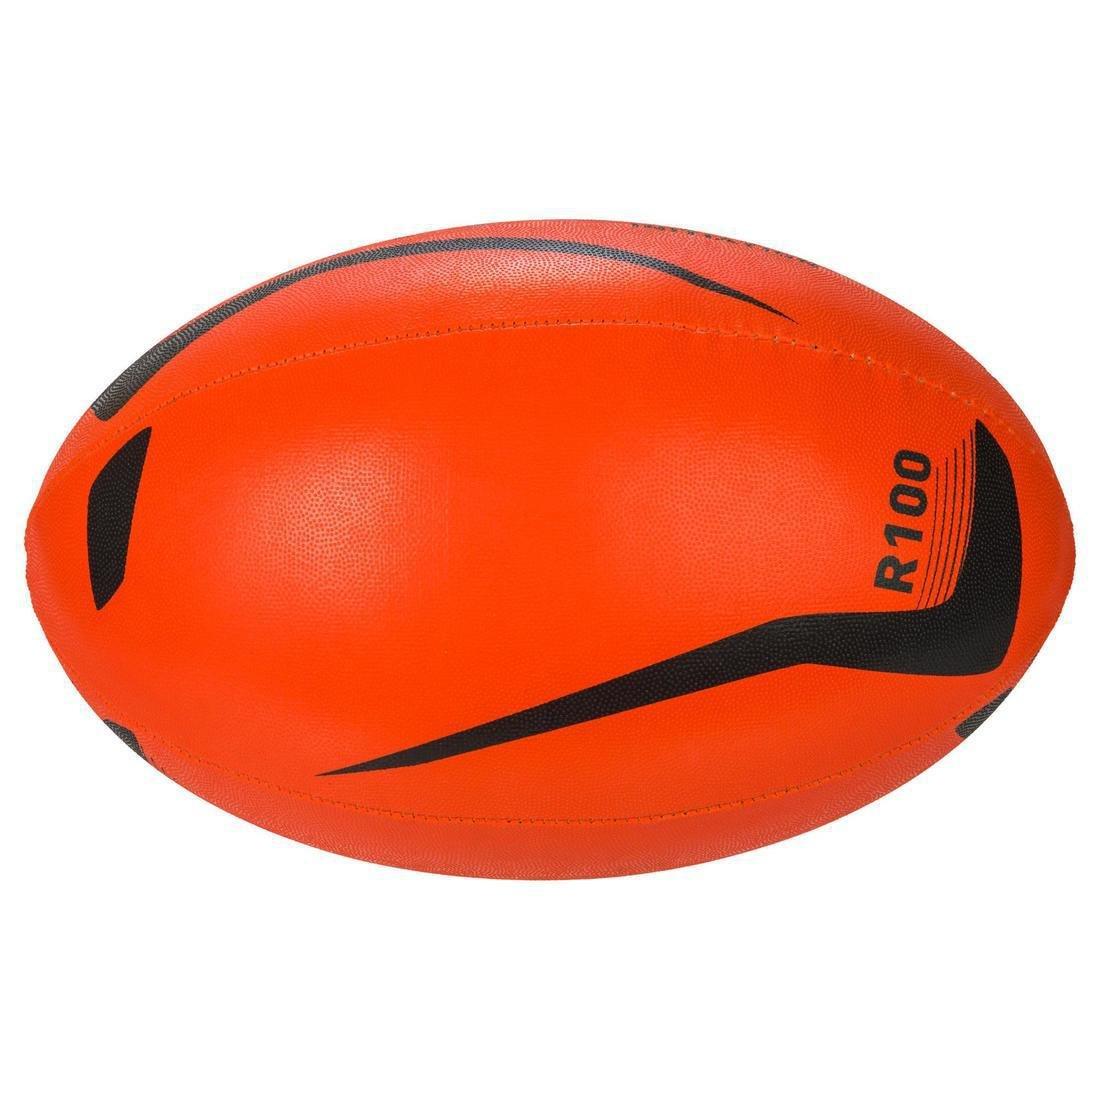 OFFLOAD - Rugby Ball Initiation, Fluo Blood Orange